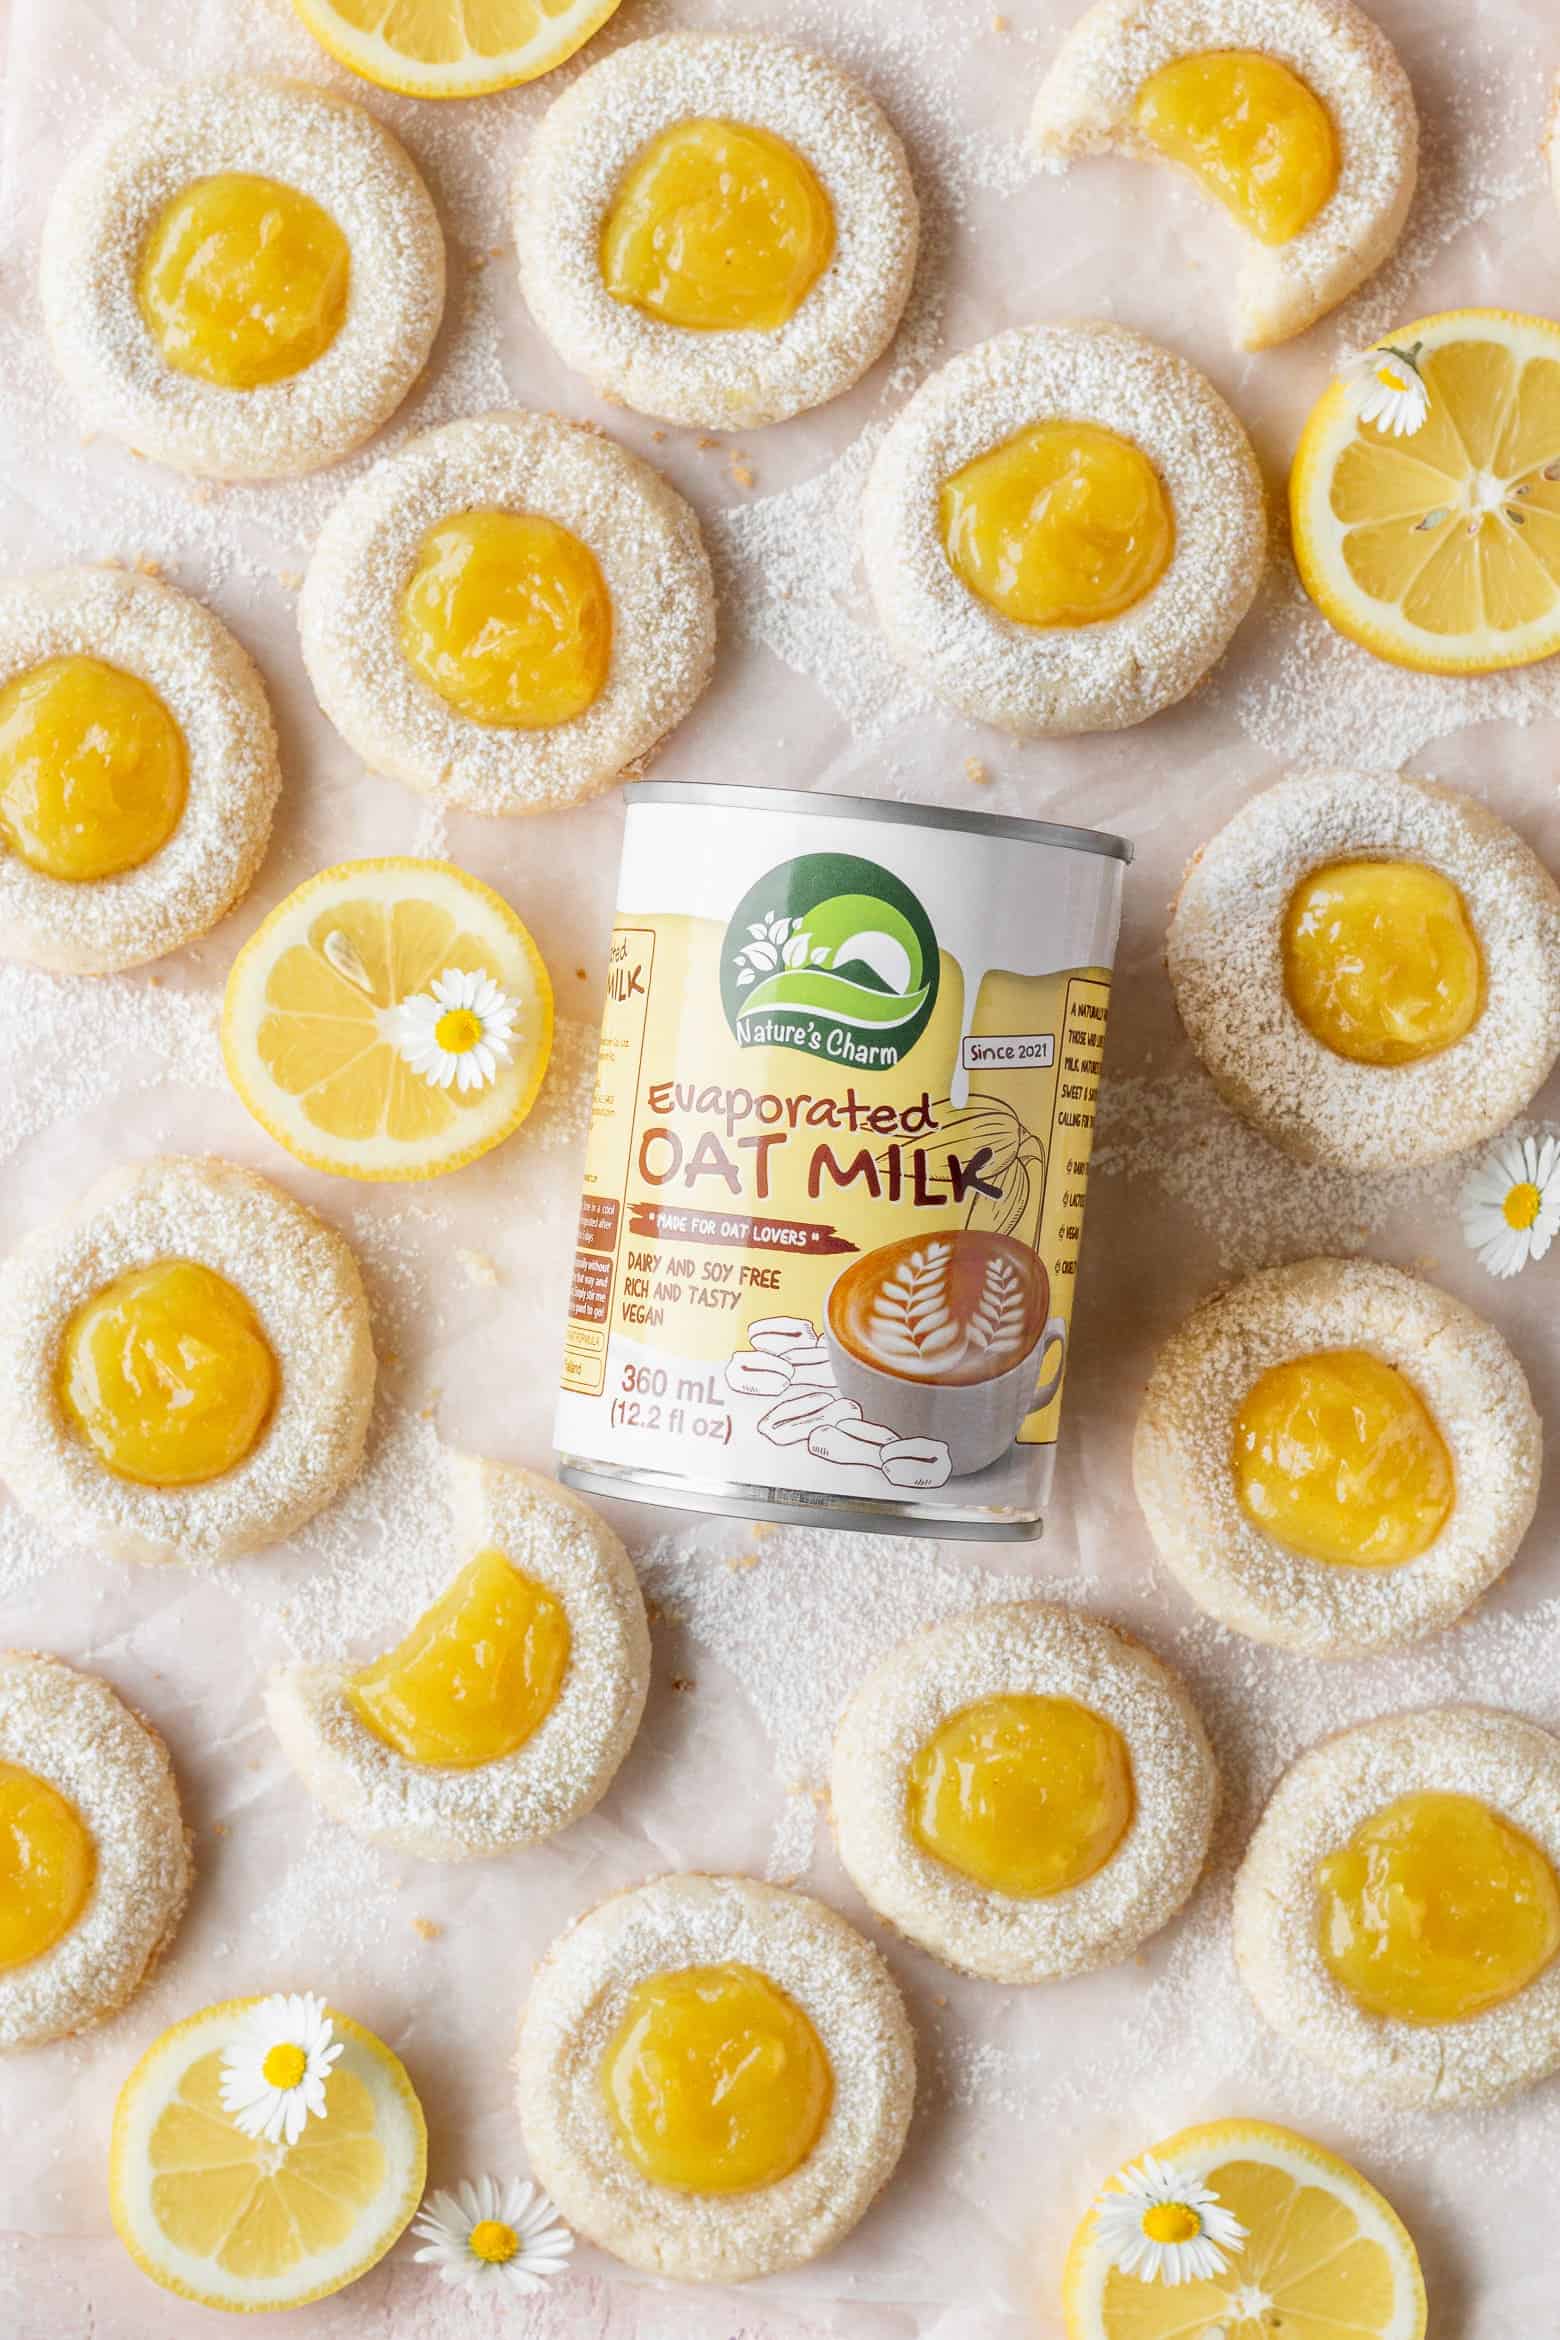 A can of Nature's Charm evaporated oat milk with lemon cookies.